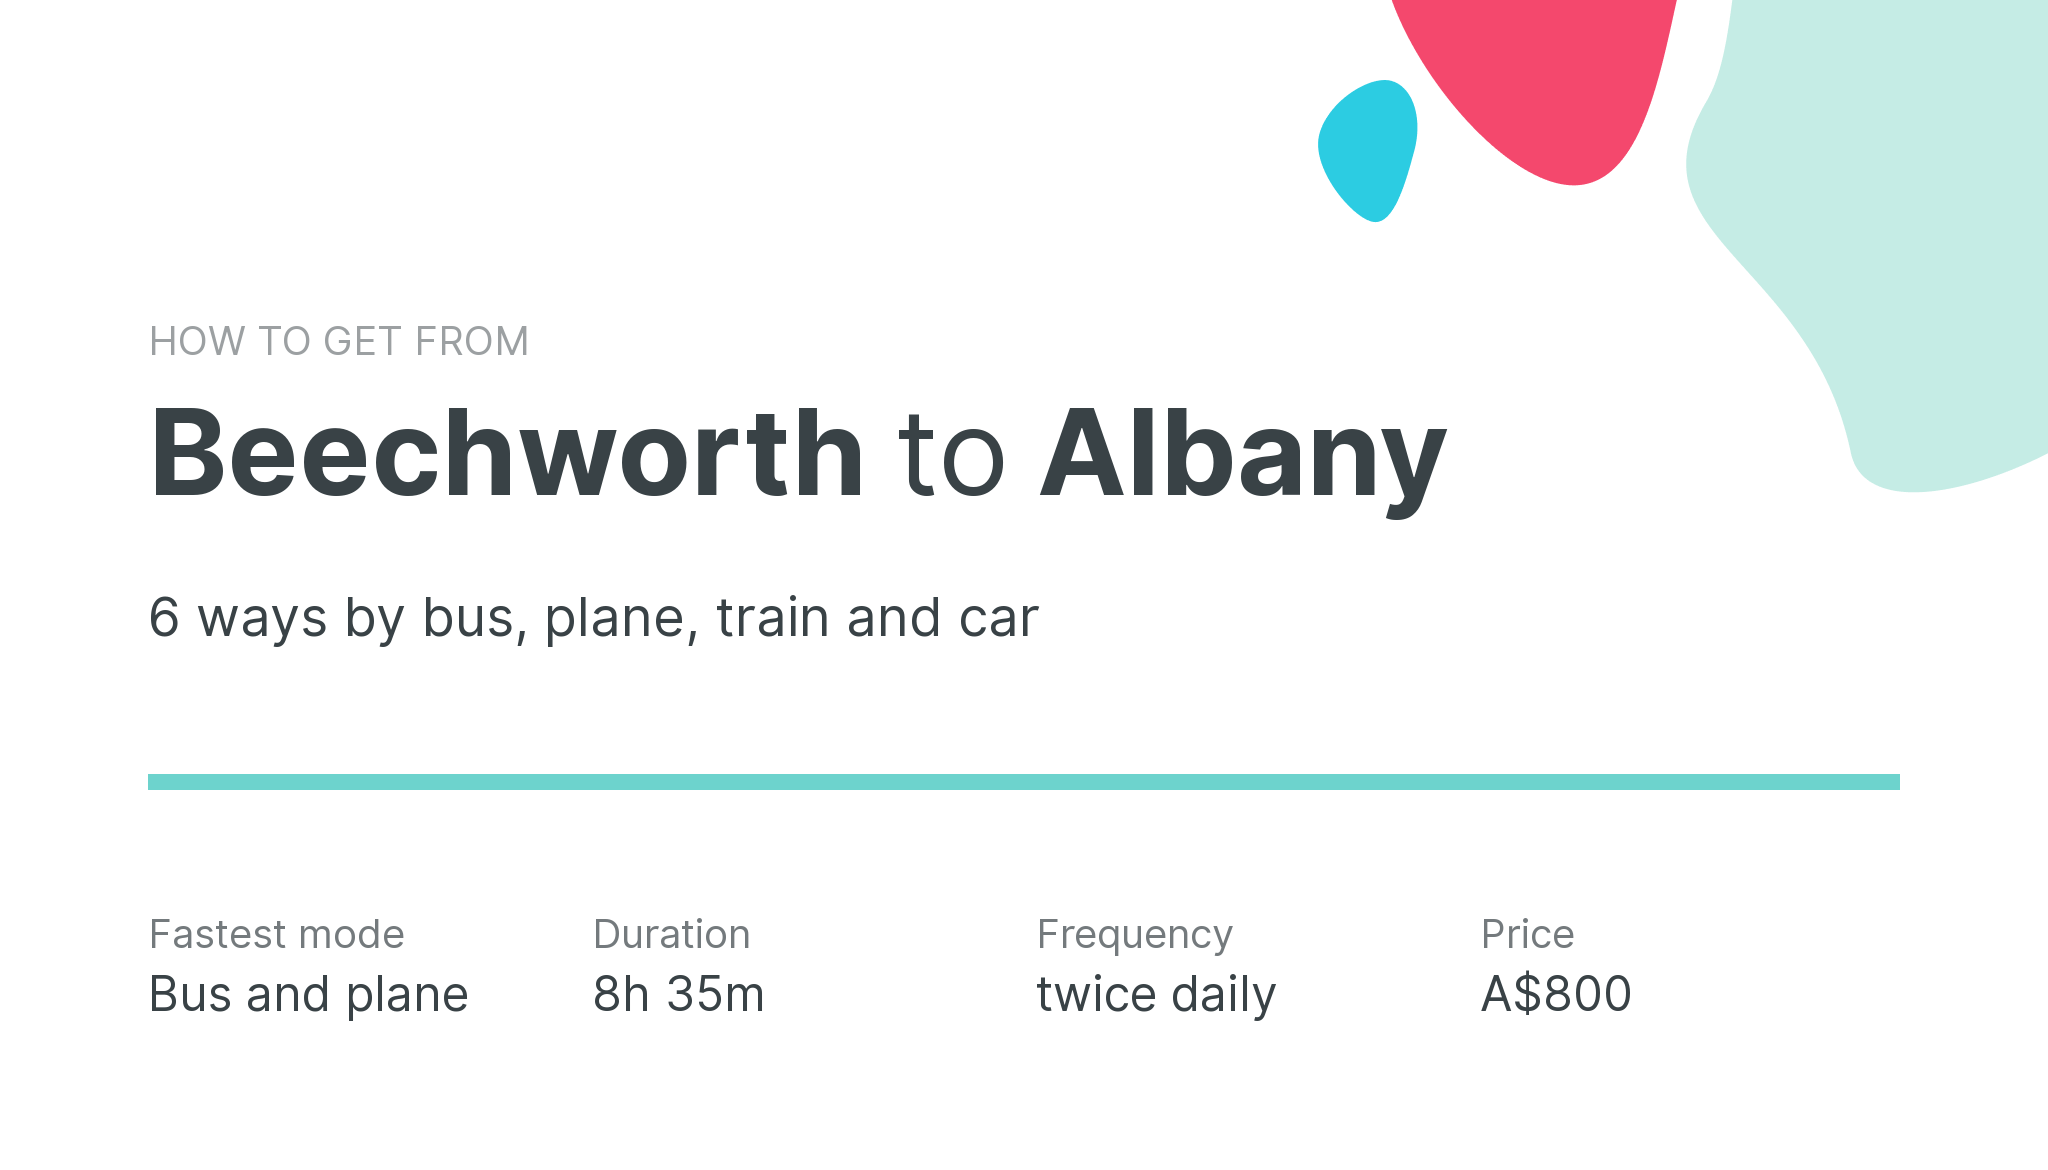 How do I get from Beechworth to Albany